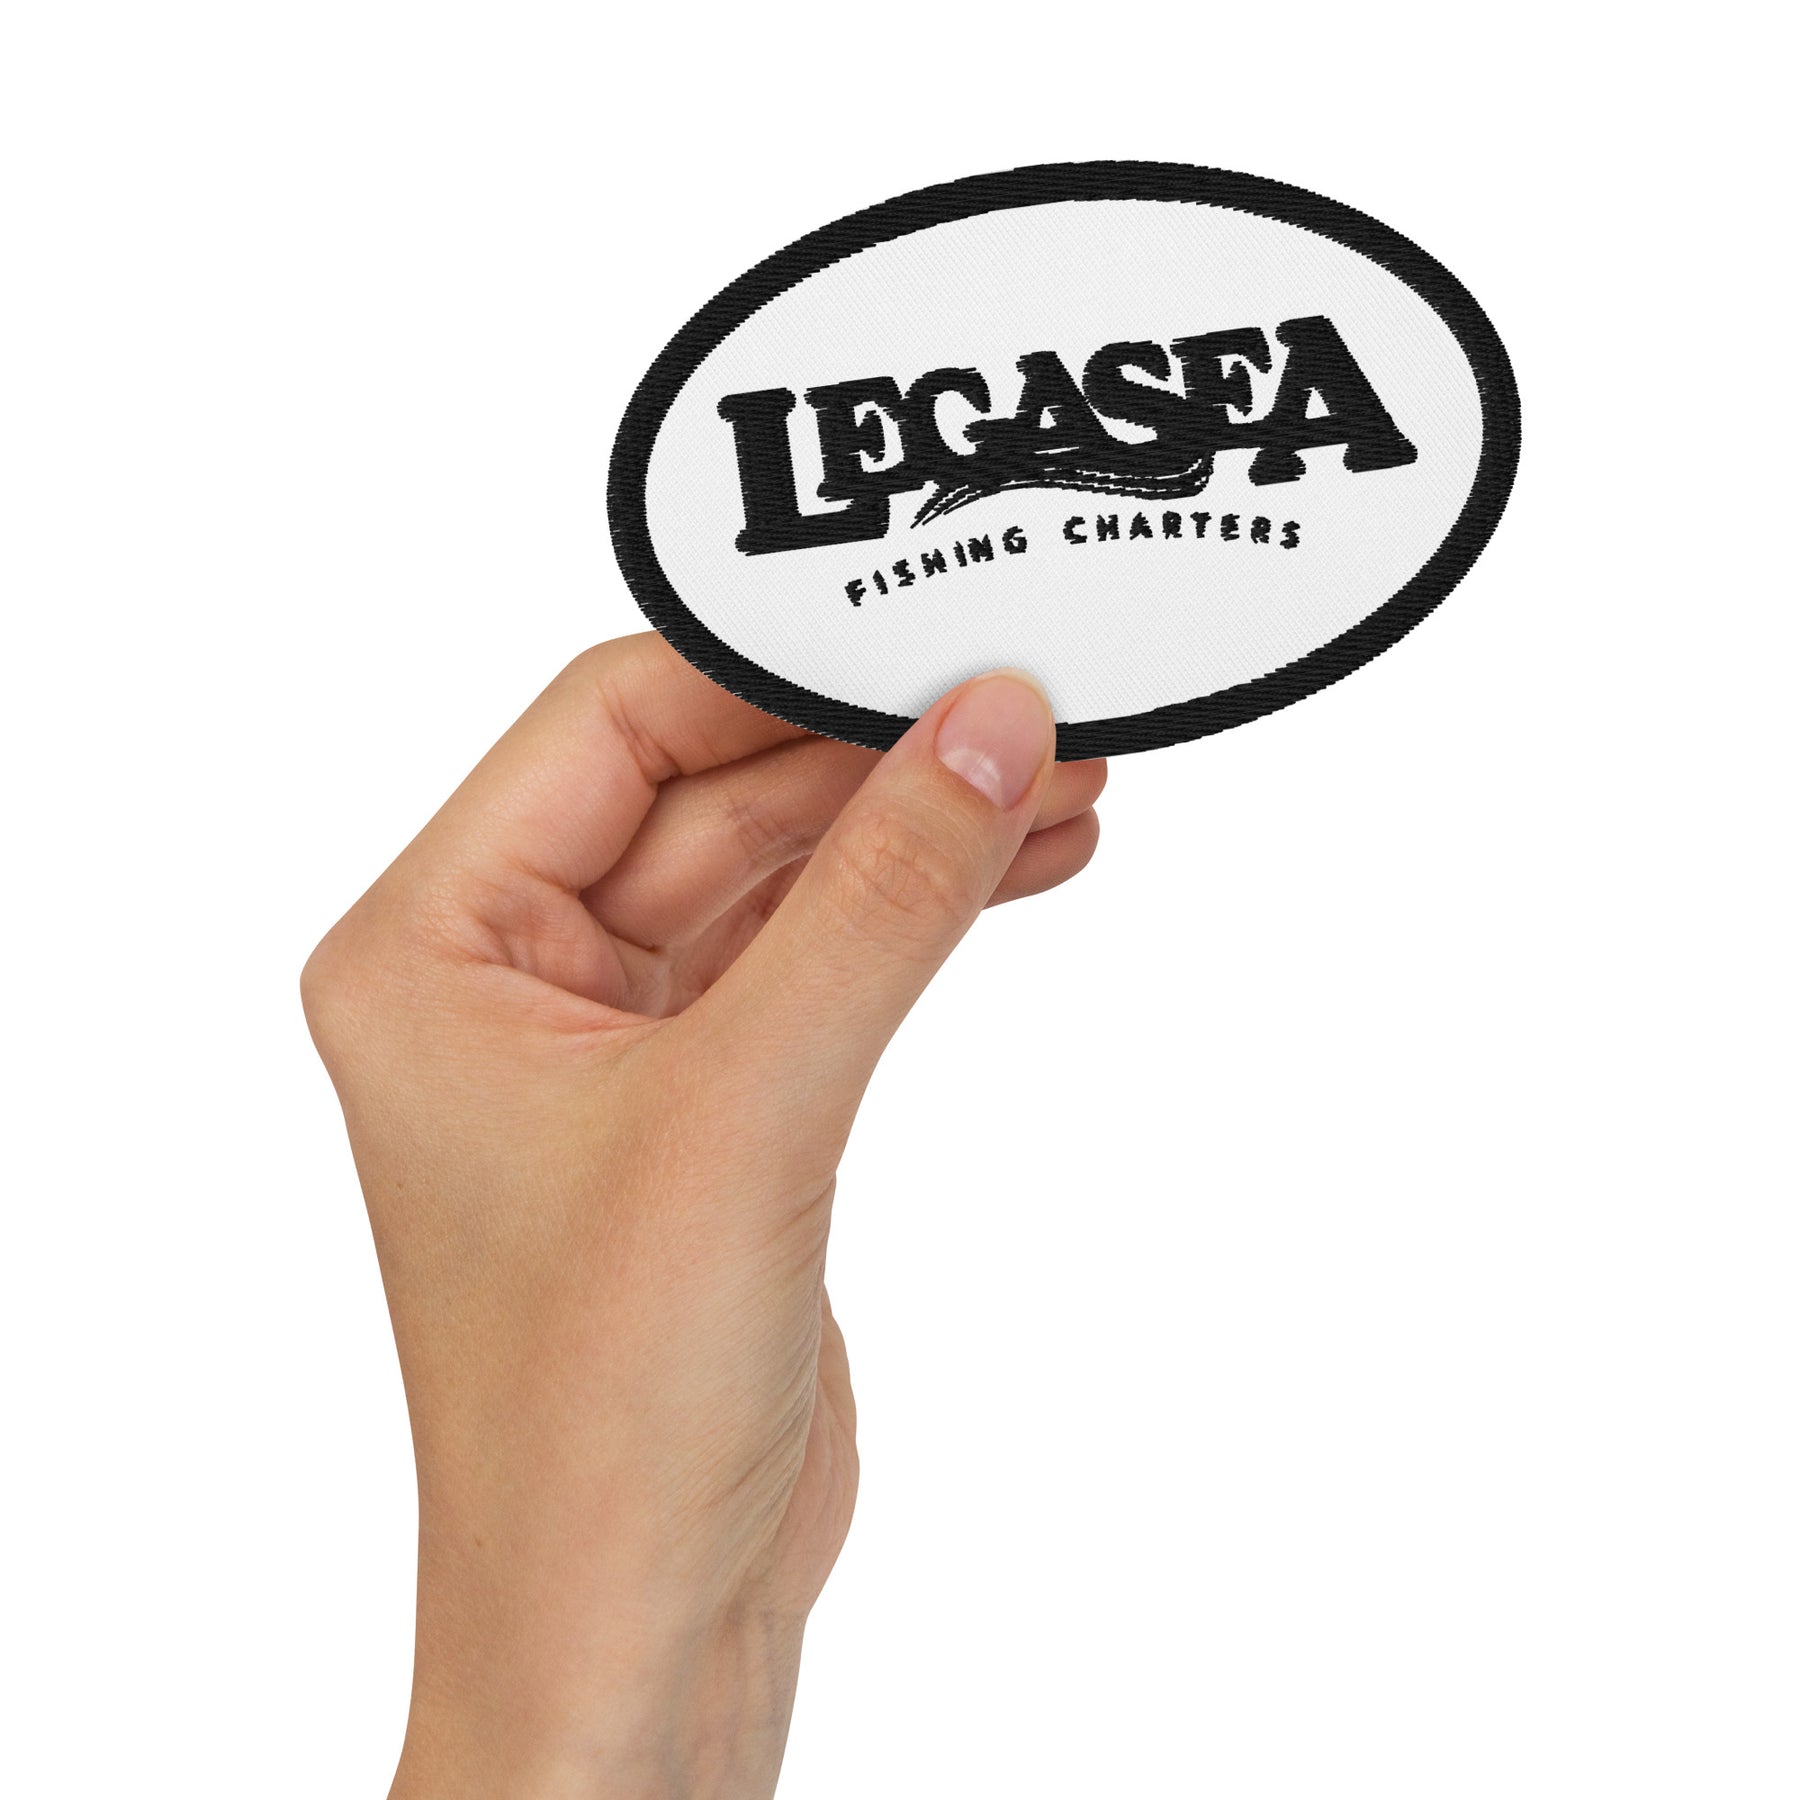 LegaSea Embroidered patches (Oval)